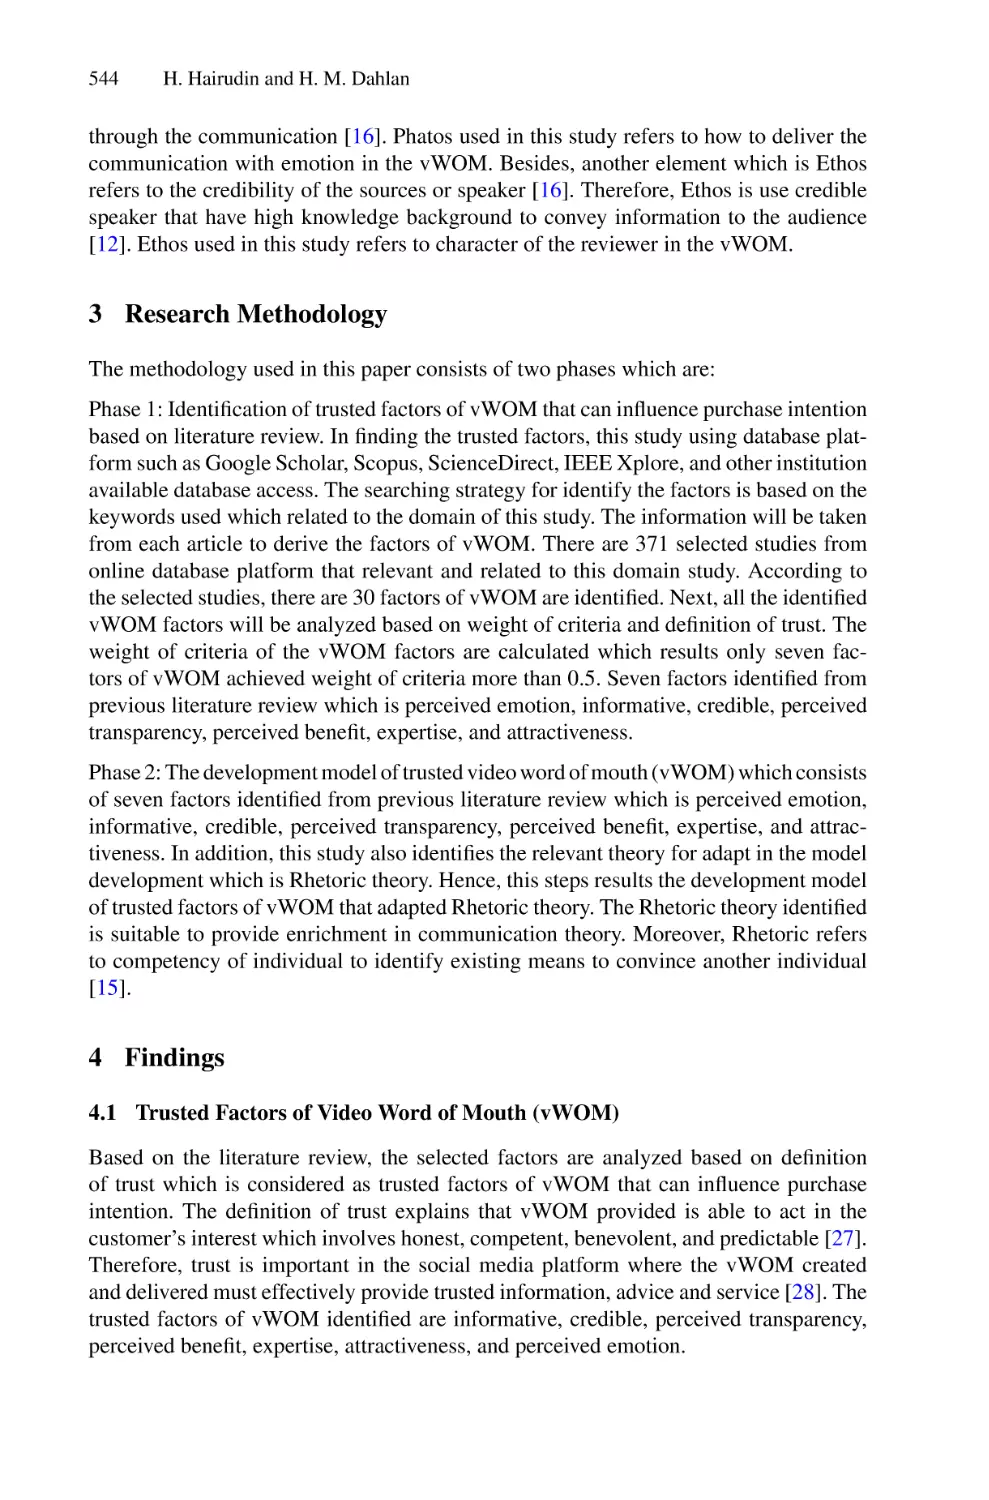 3 Research Methodology
4 Findings
4.1 Trusted Factors of Video Word of Mouth (vWOM)